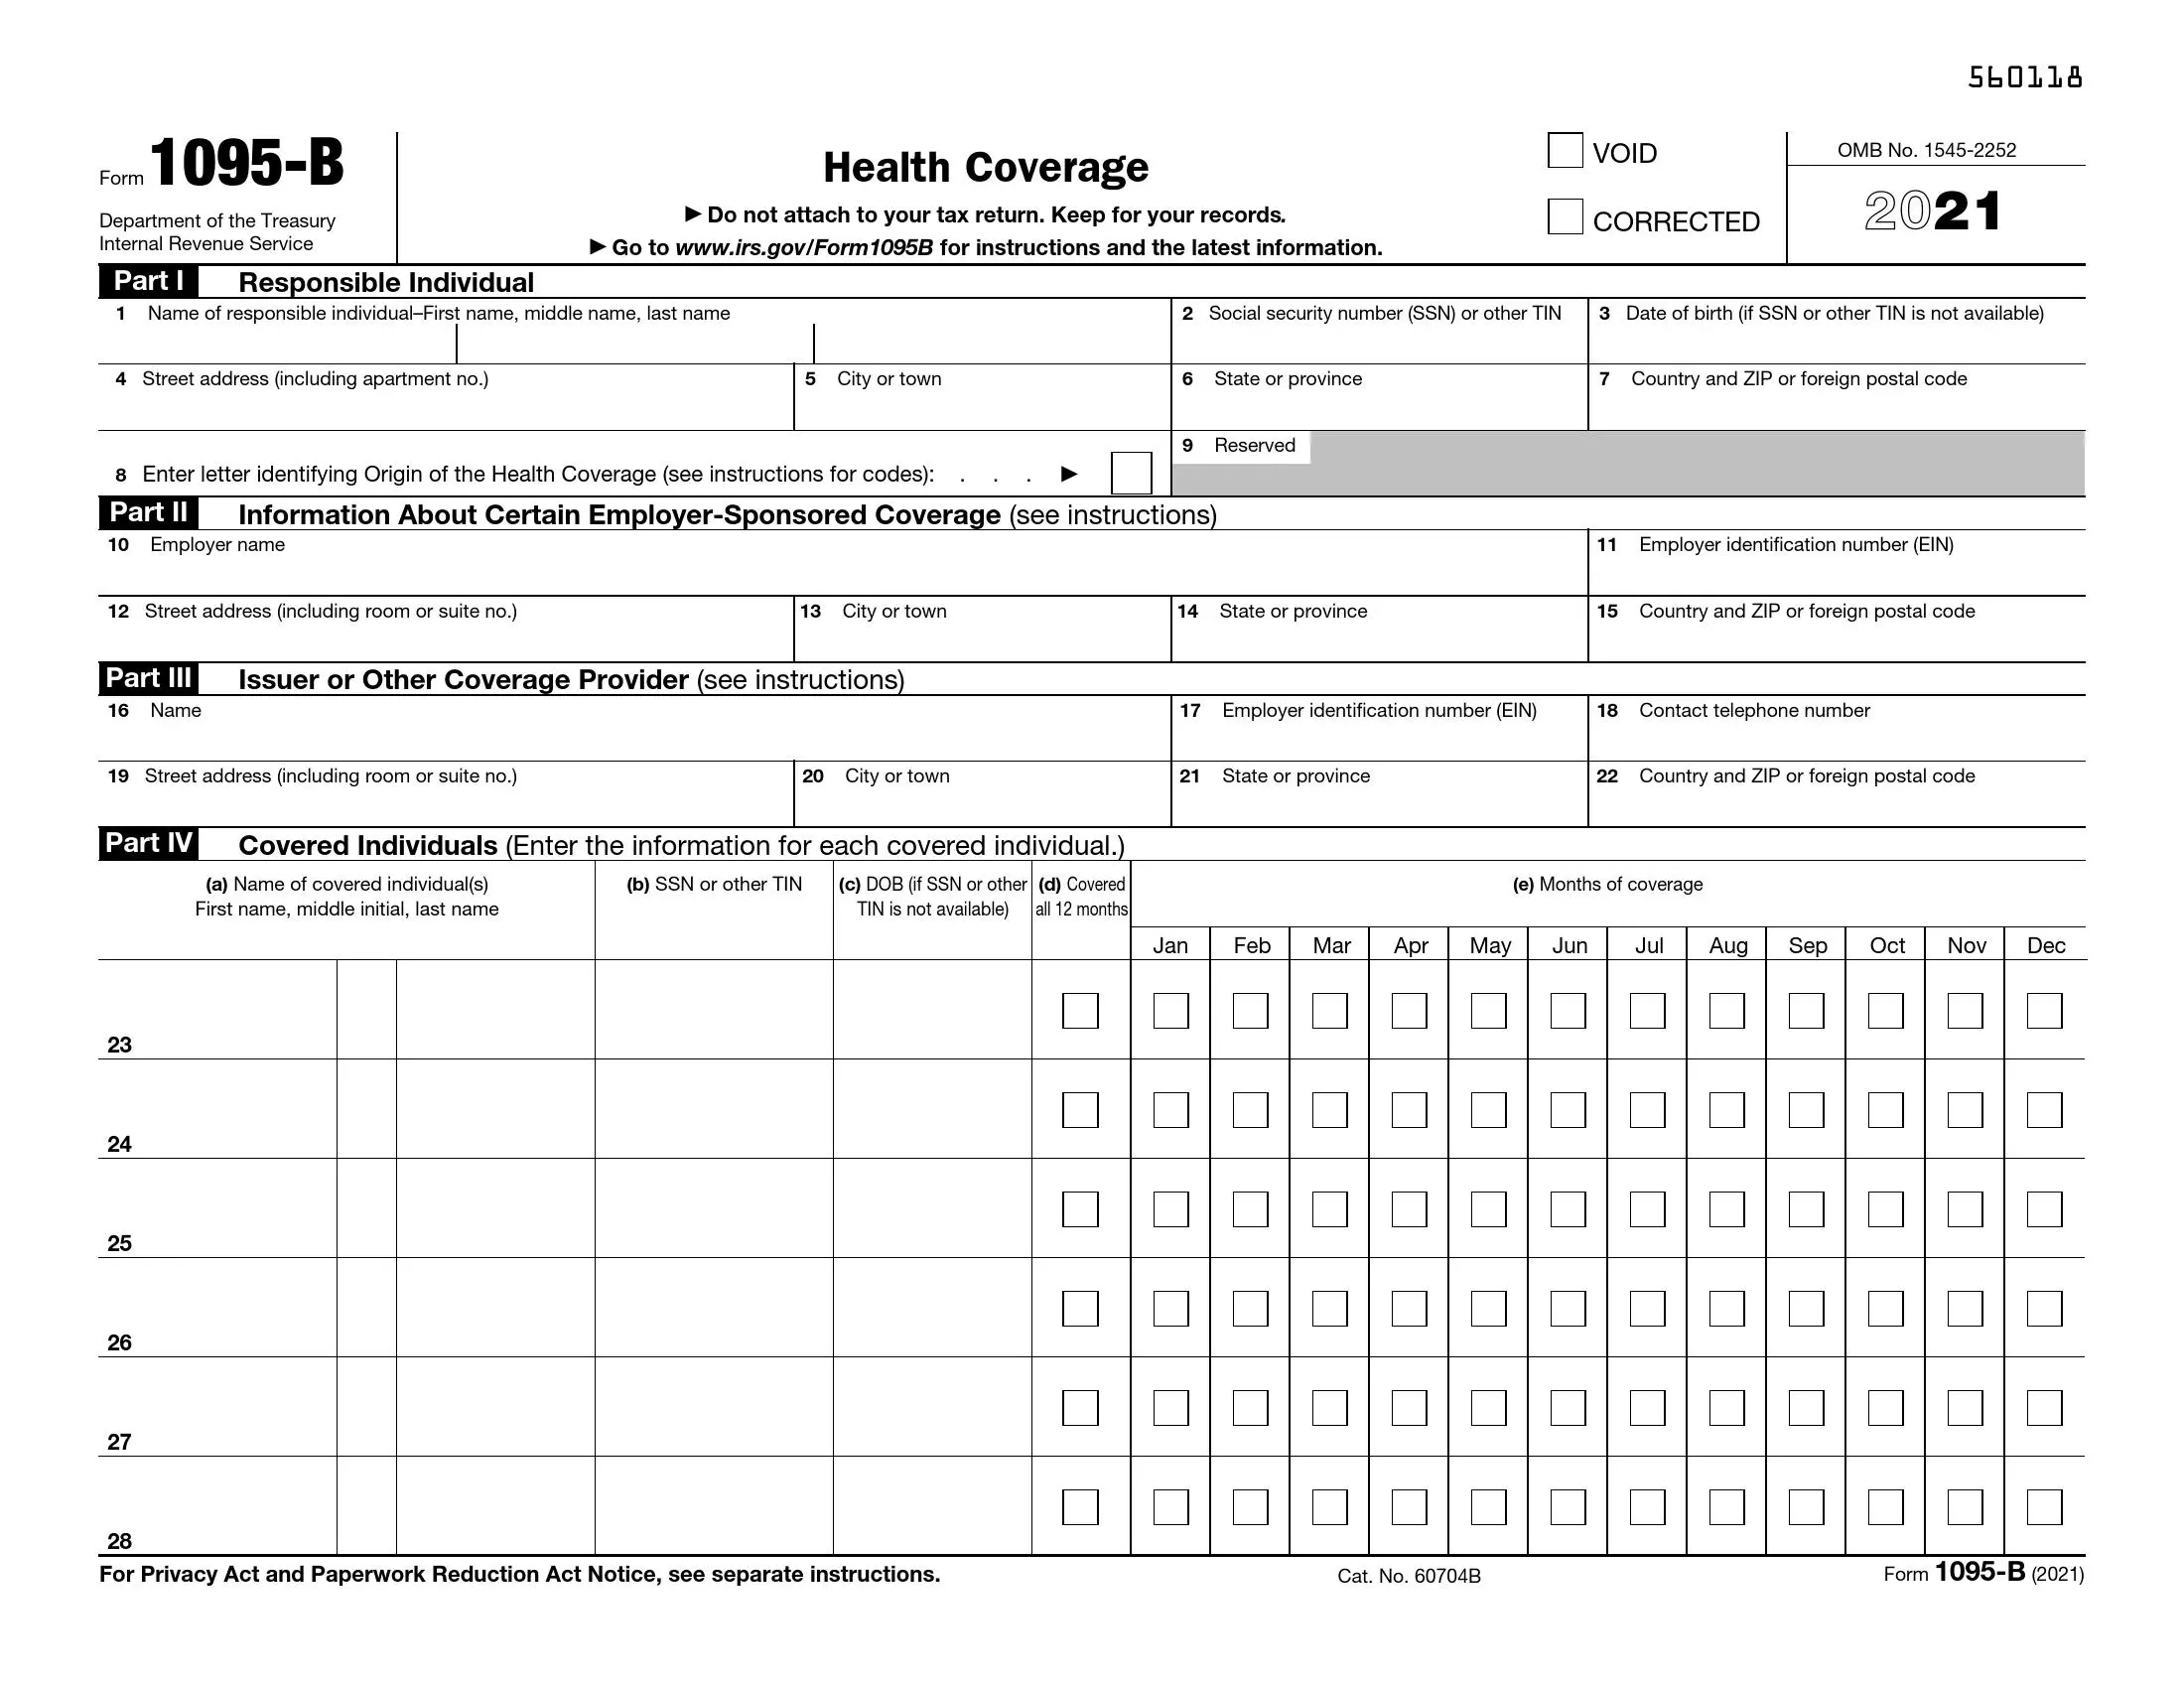 irs form 1095 b 2021 preview